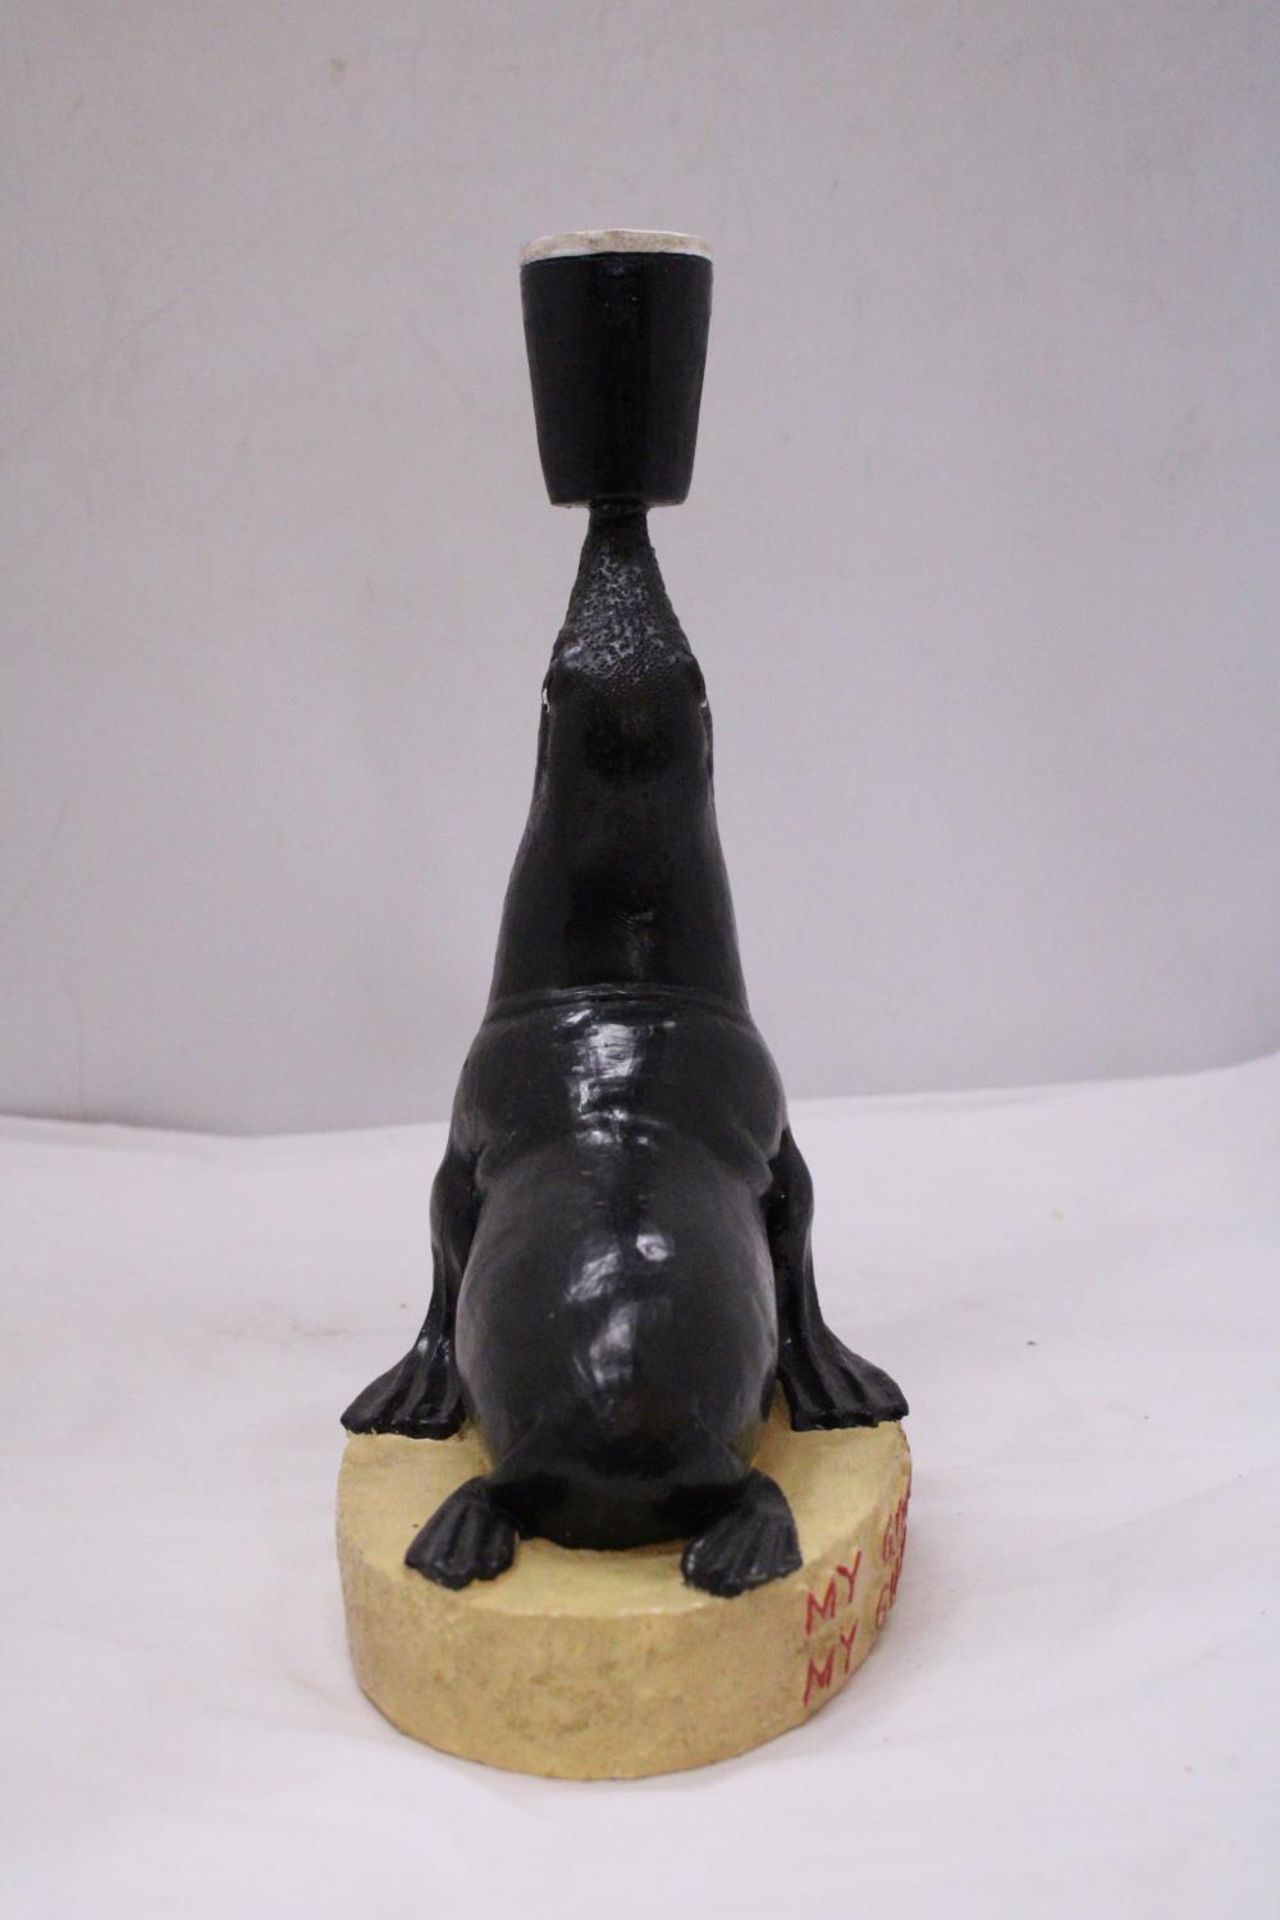 A MY GOODNESS MY GUINESS ADVERTISING RESIN SEAL APPROXIMATELY 11.5" TALL - Image 3 of 5